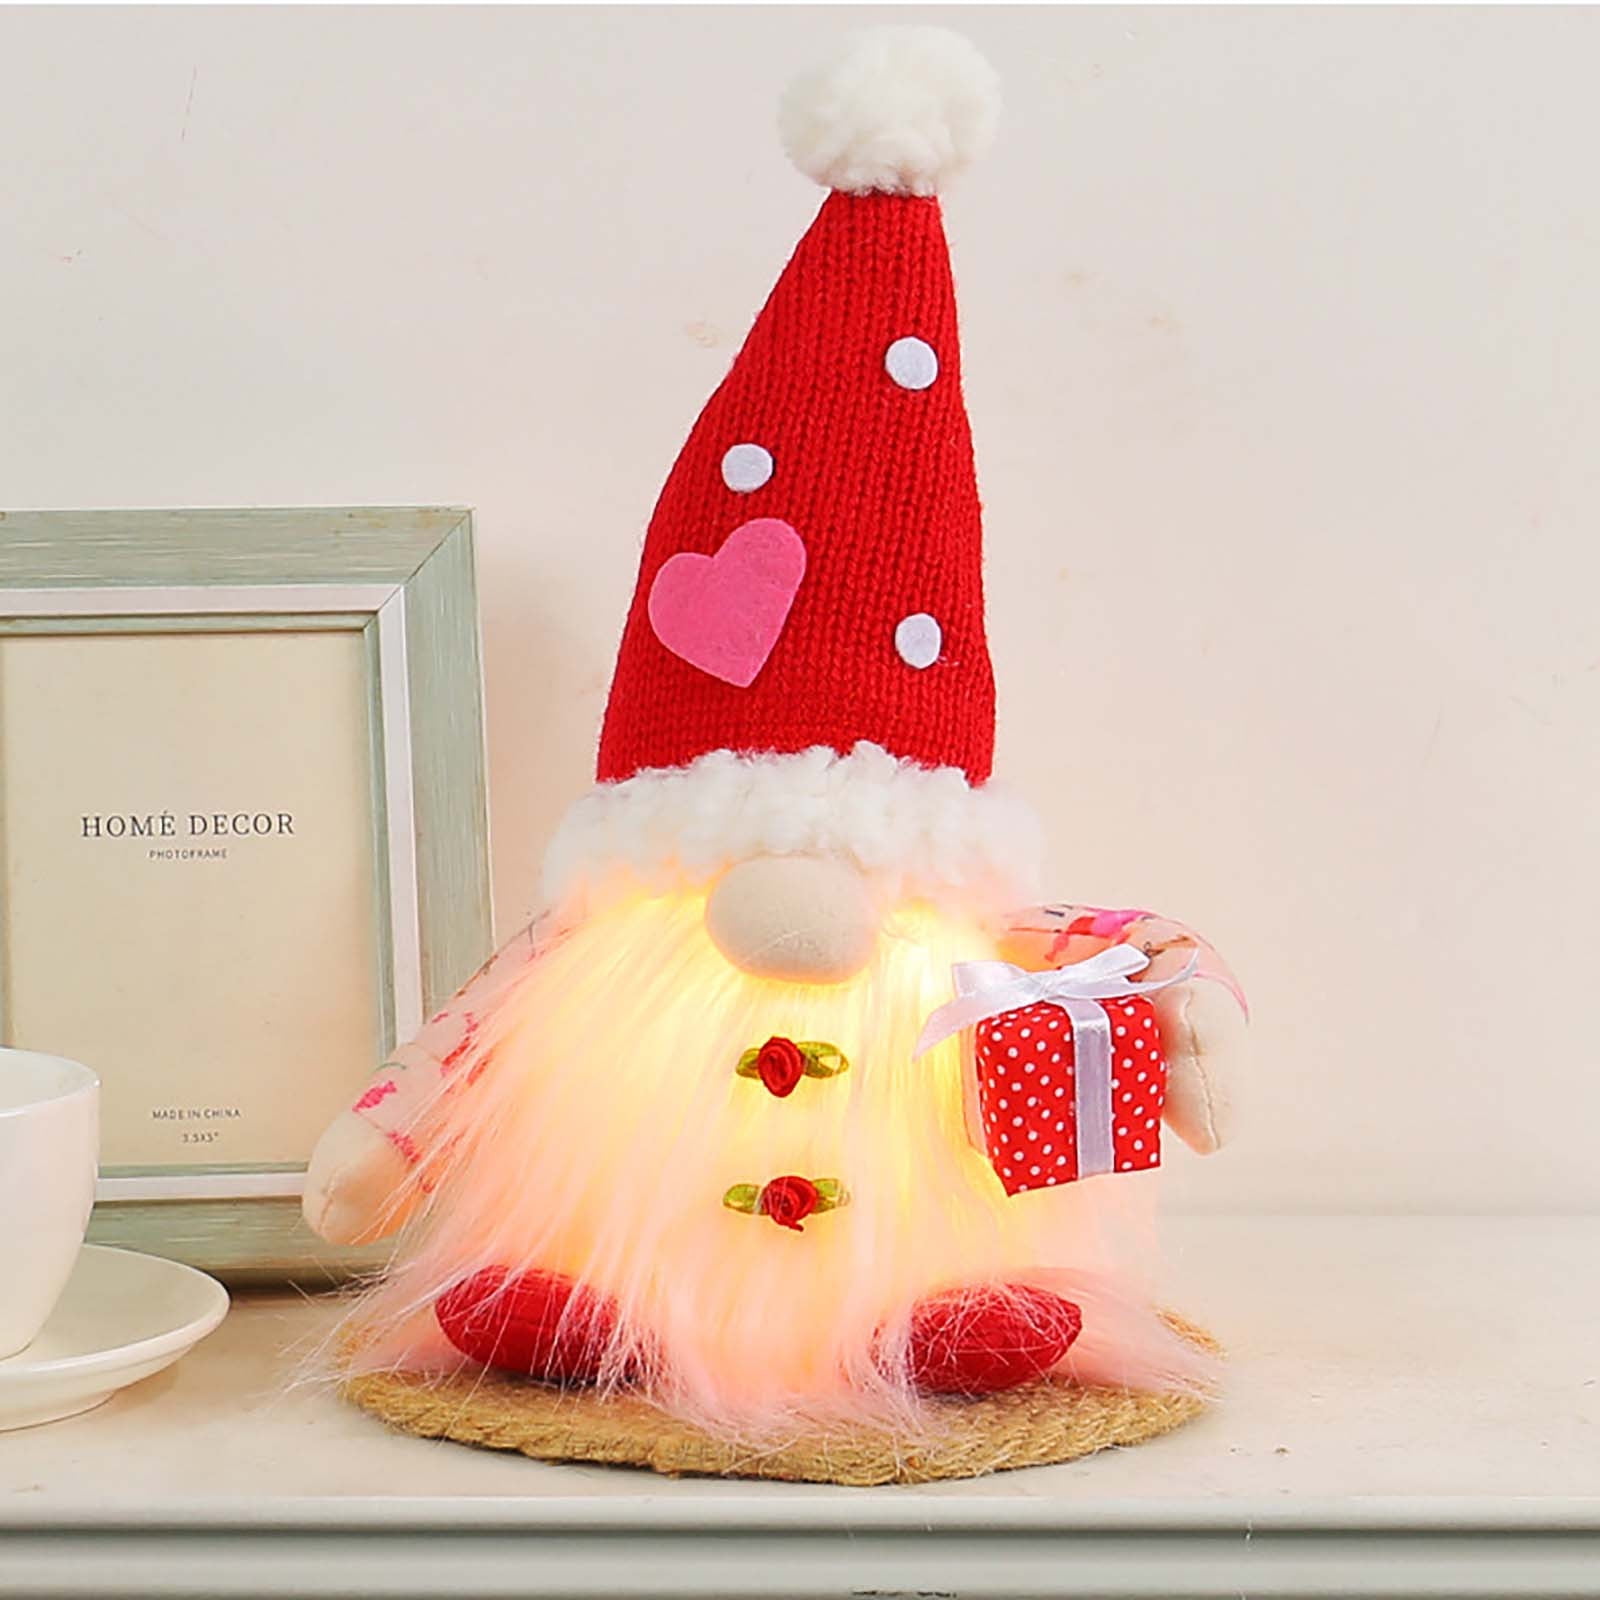 SDJMa Lighted Valentine's Day Gnomes, Plush Light Up Heart Gnomes with ...